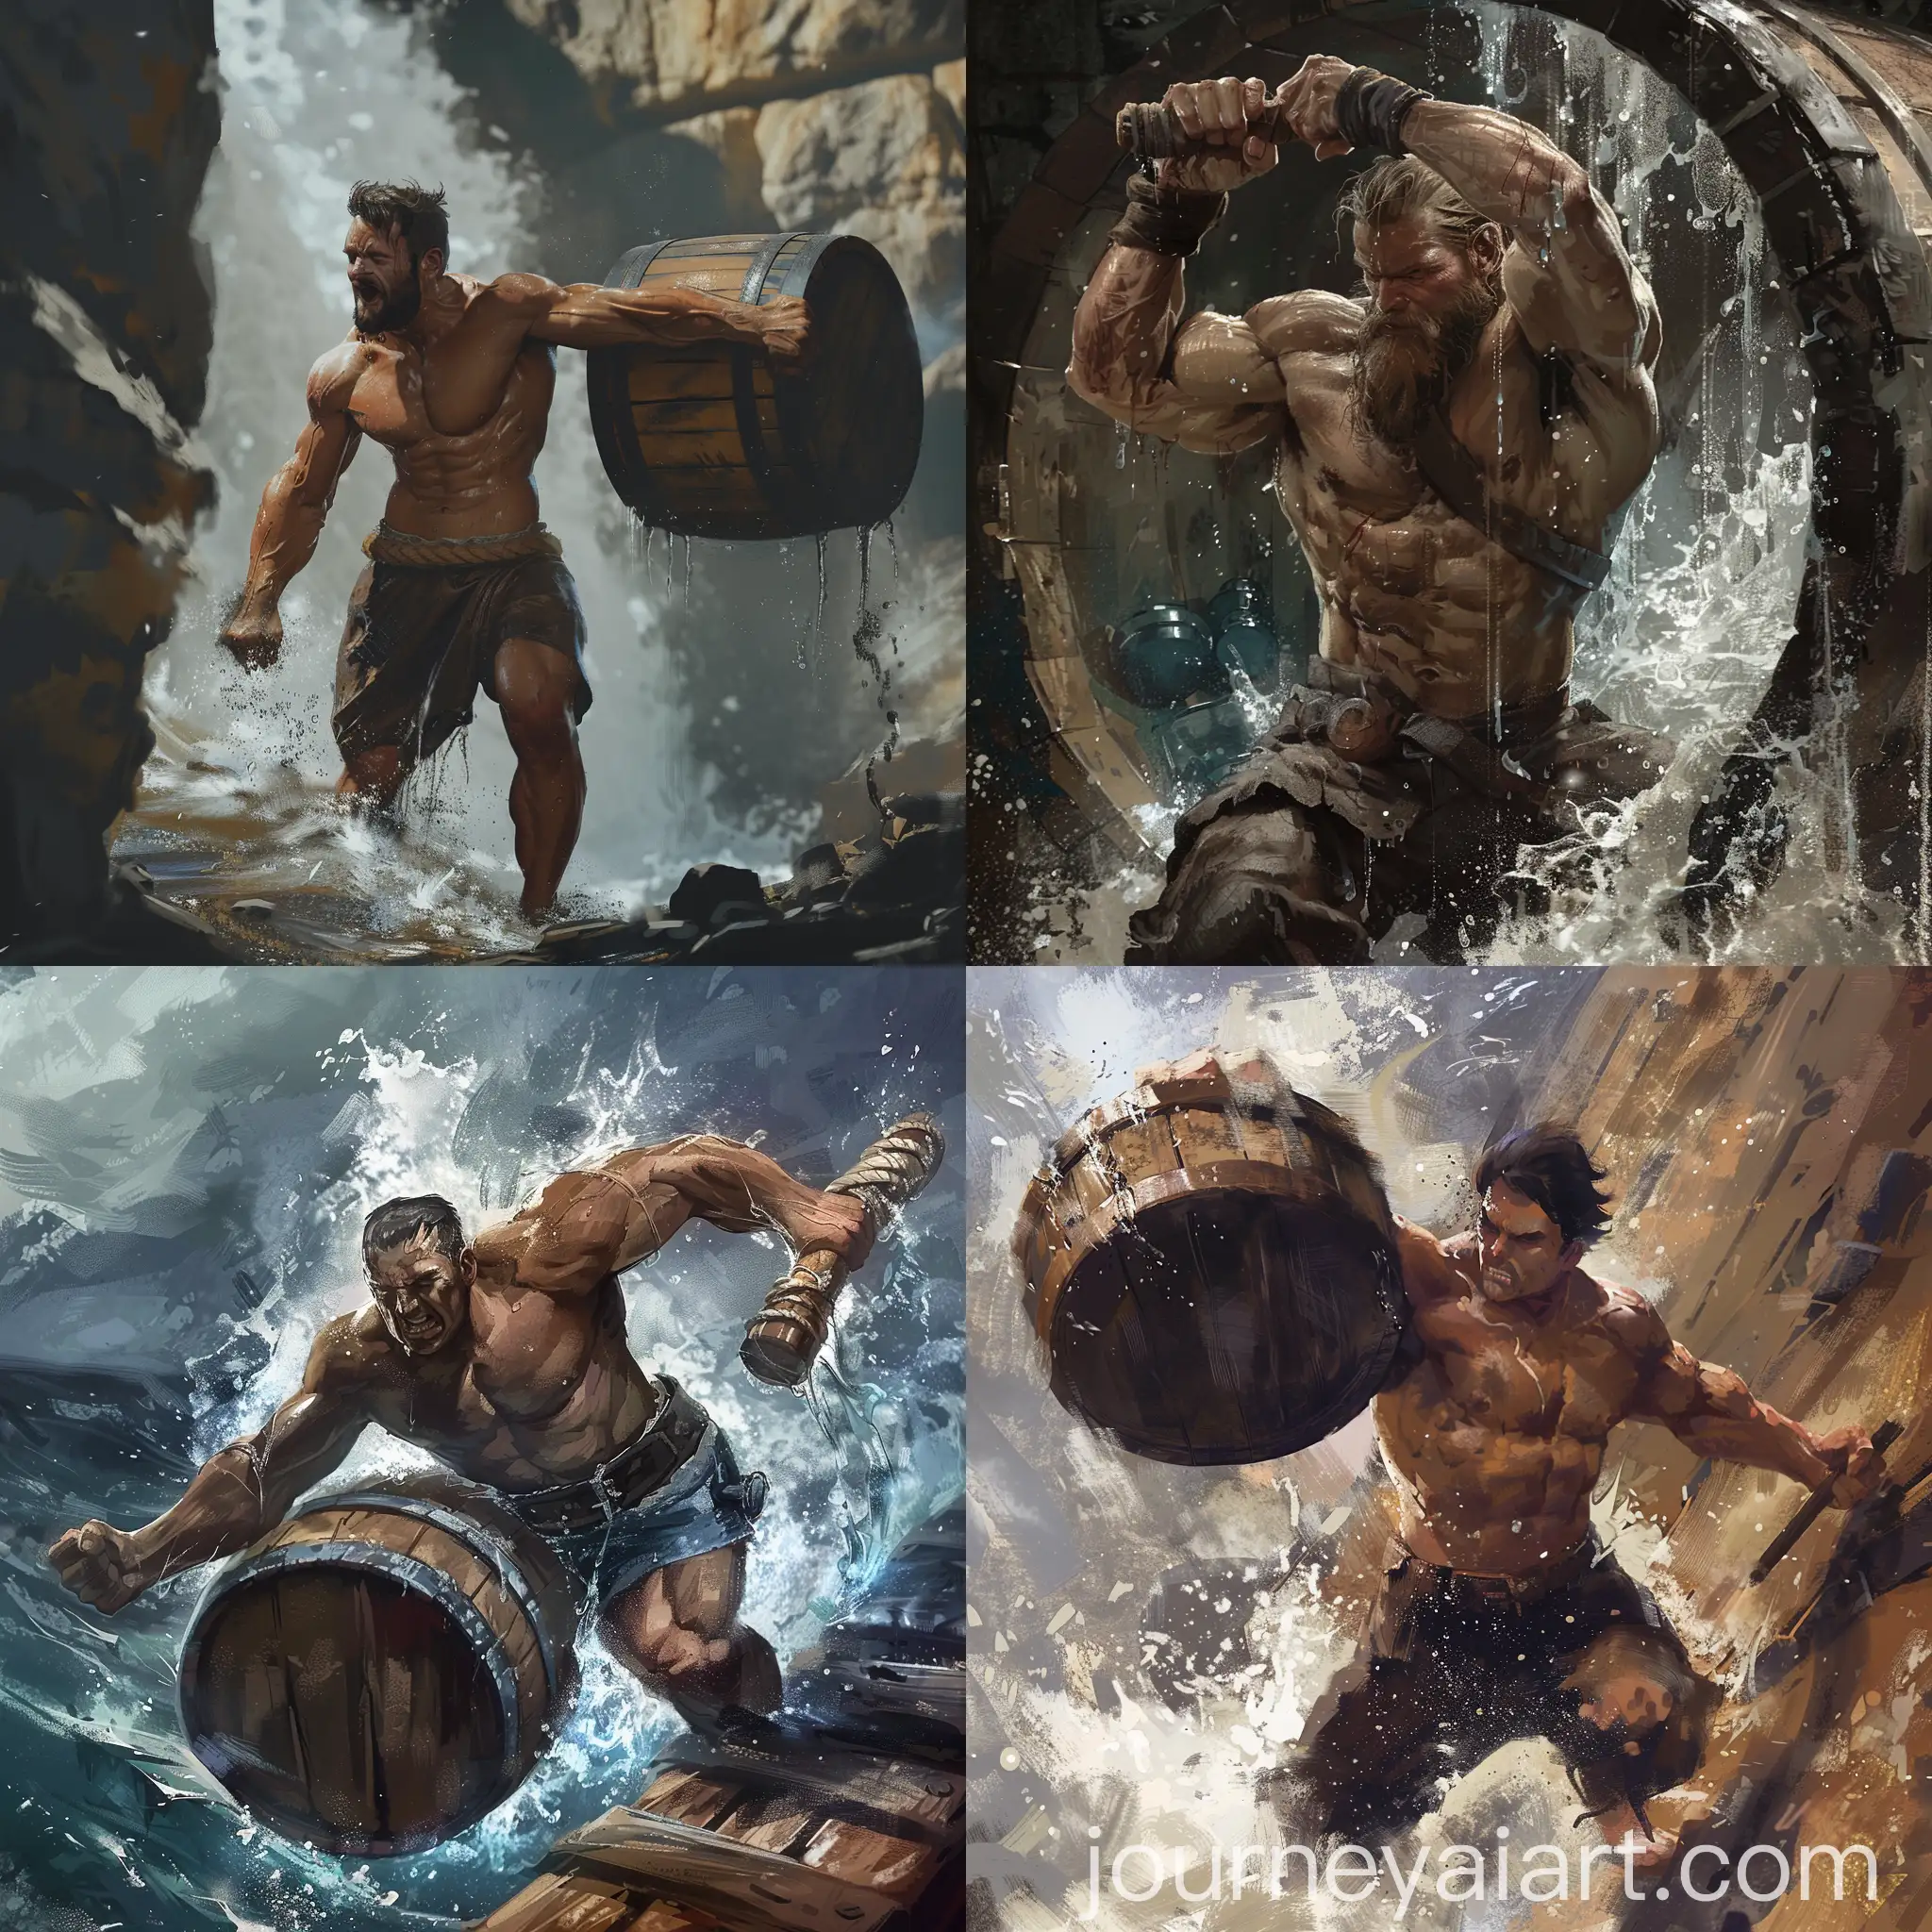 Strong-Man-Pushing-Water-Barrel-Uphill-Muscular-Strength-Concept